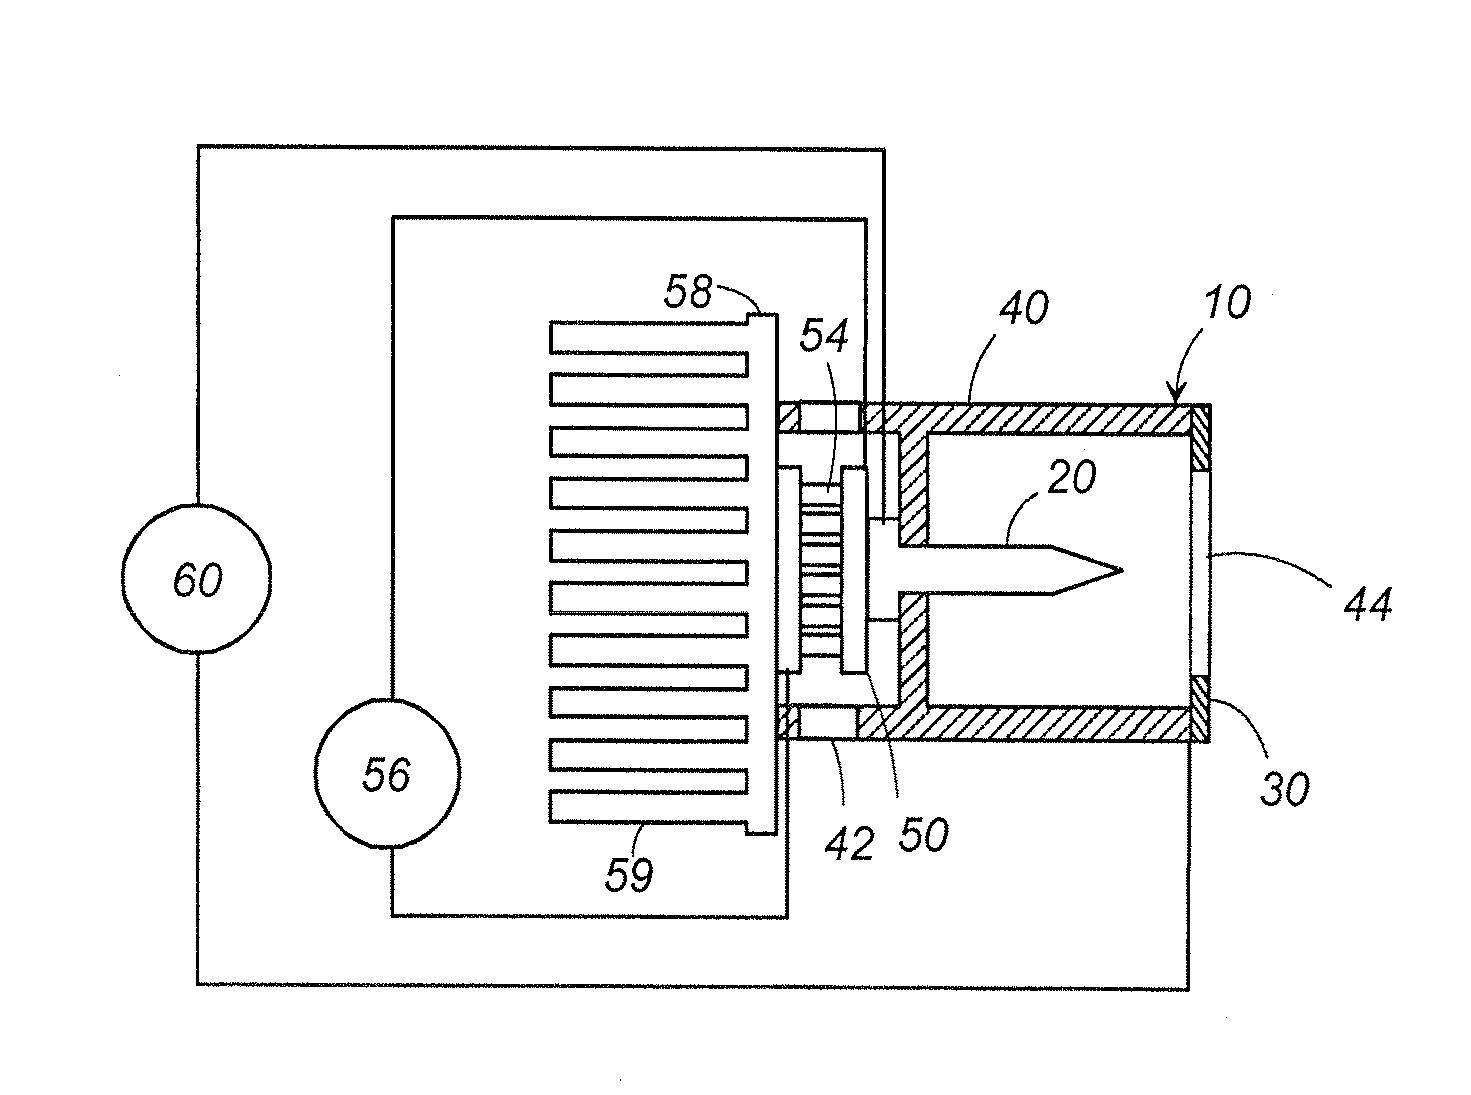 Air conditioning system with electrostatically atomizing function